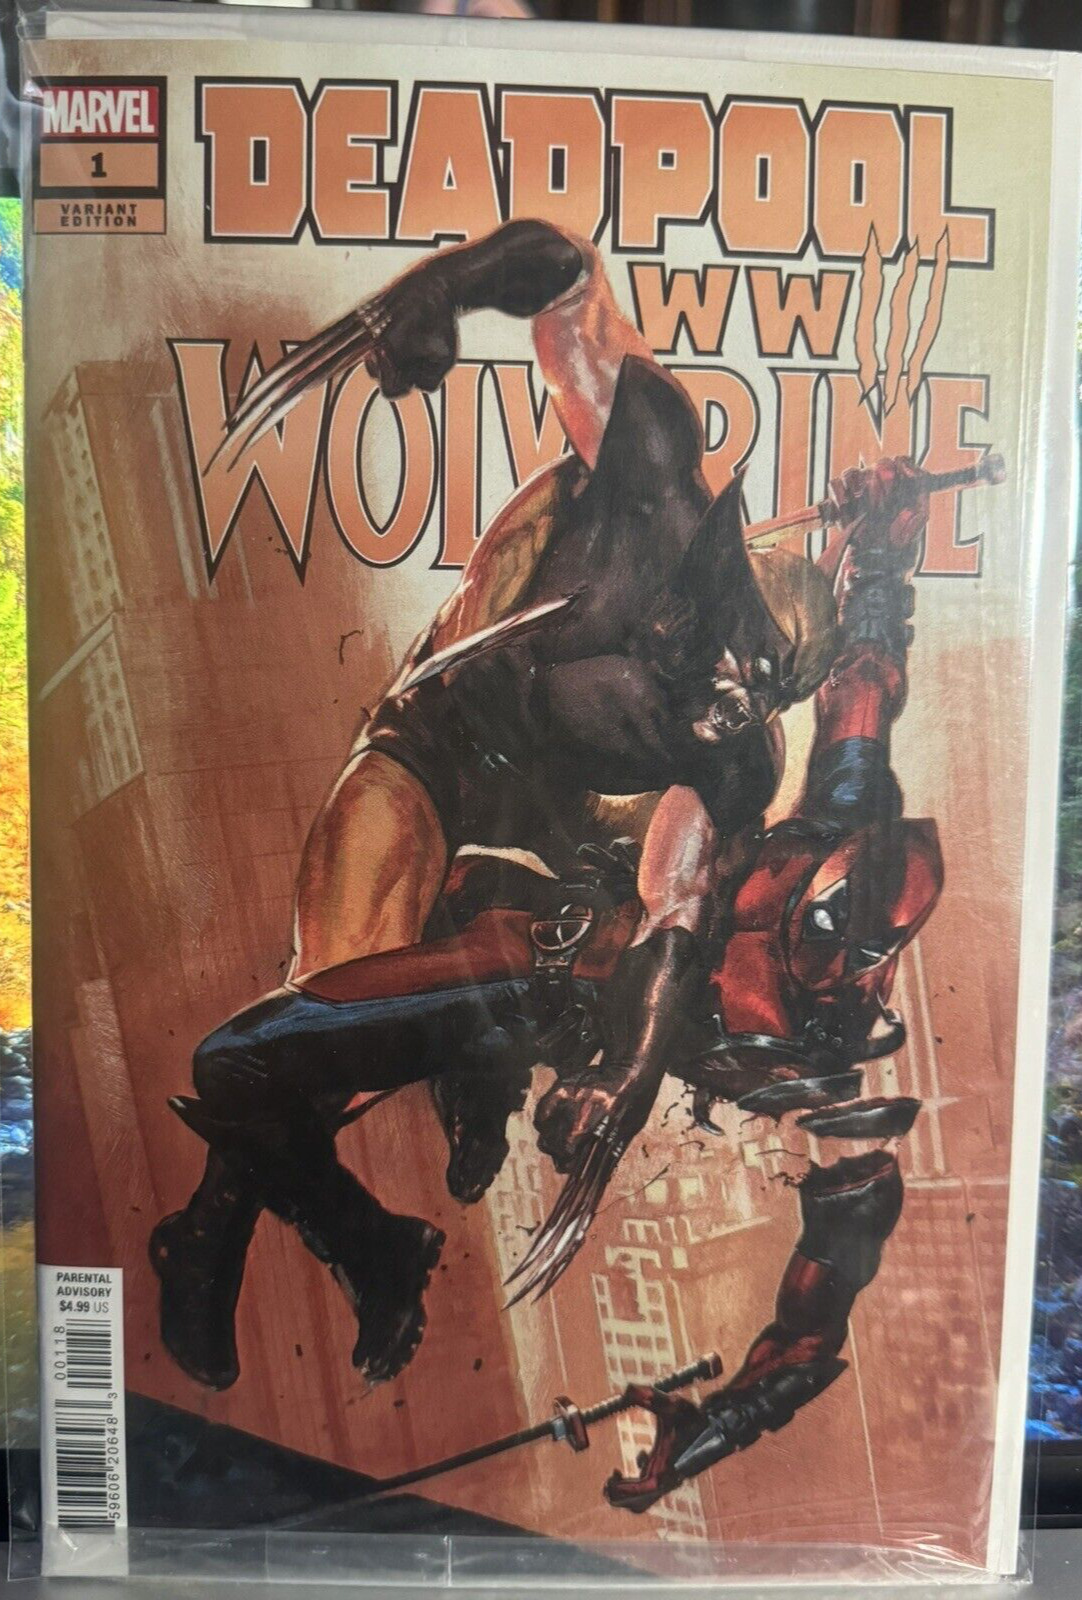 DEADPOOL WOLVERINE WWIII #1 DELL\'OTTO  Surprise 1 Per Store Variant Poly bagged